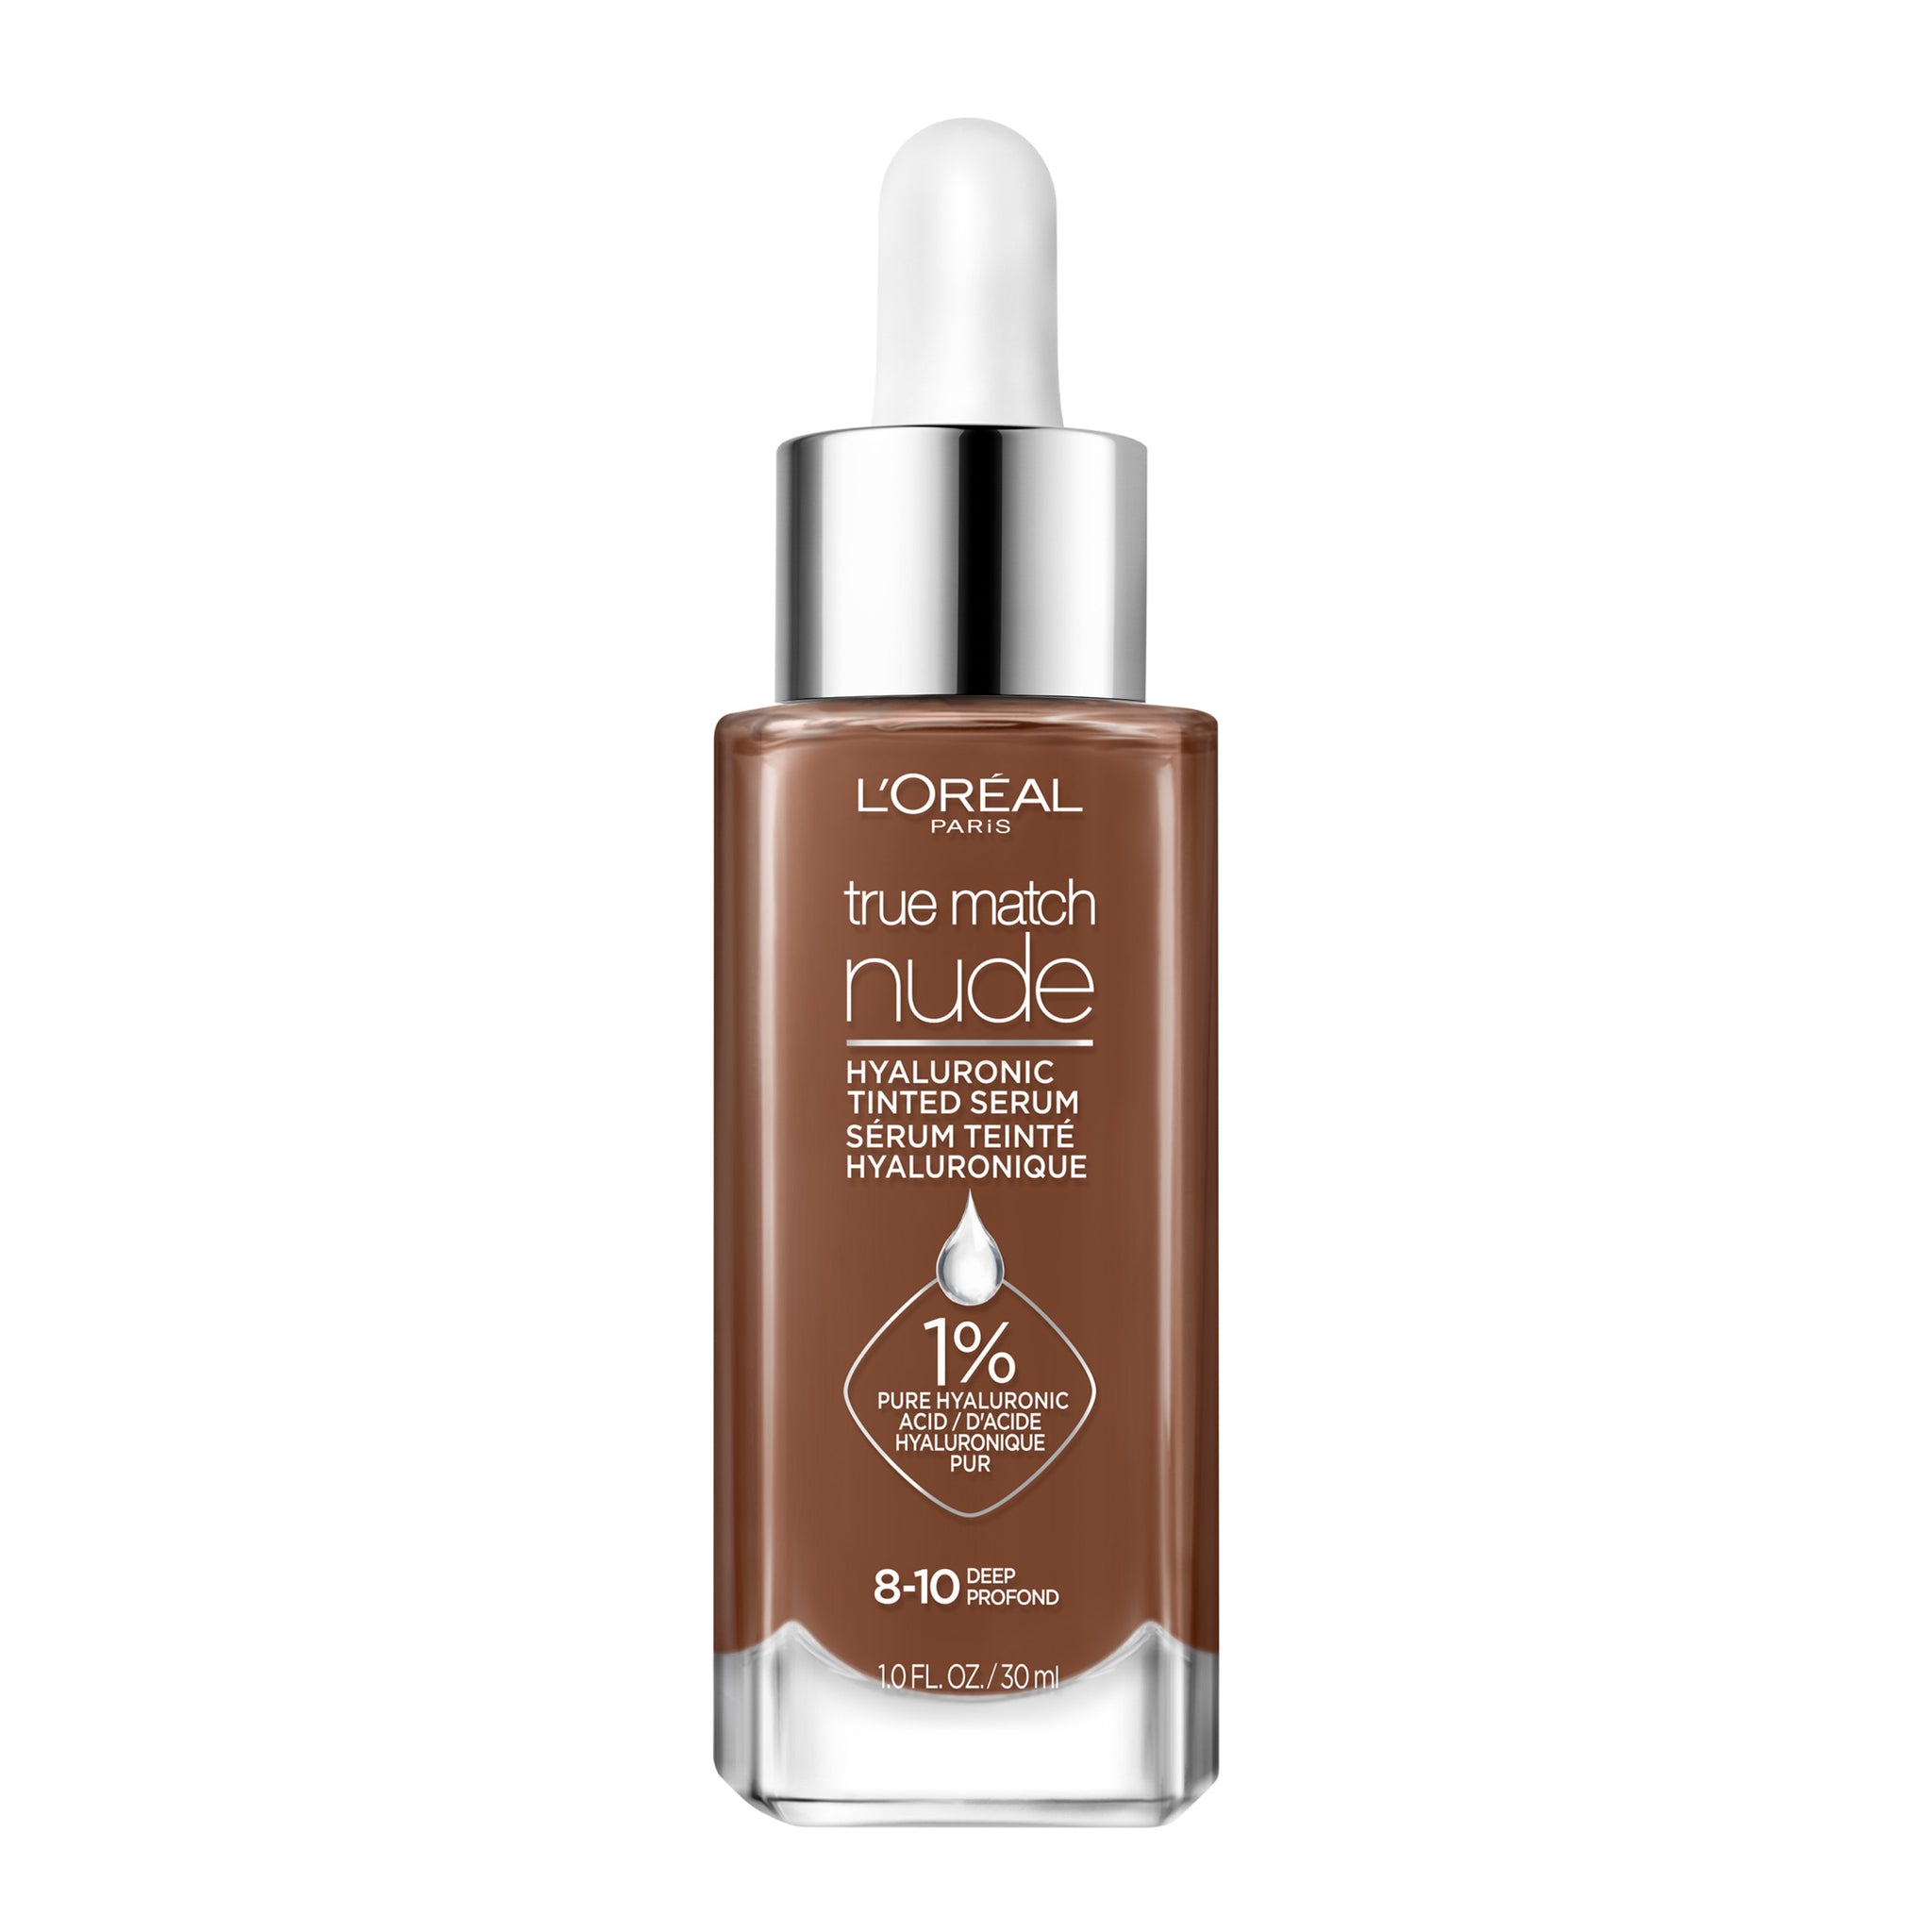 True Match Nude Hyaluronic Tinted Serum